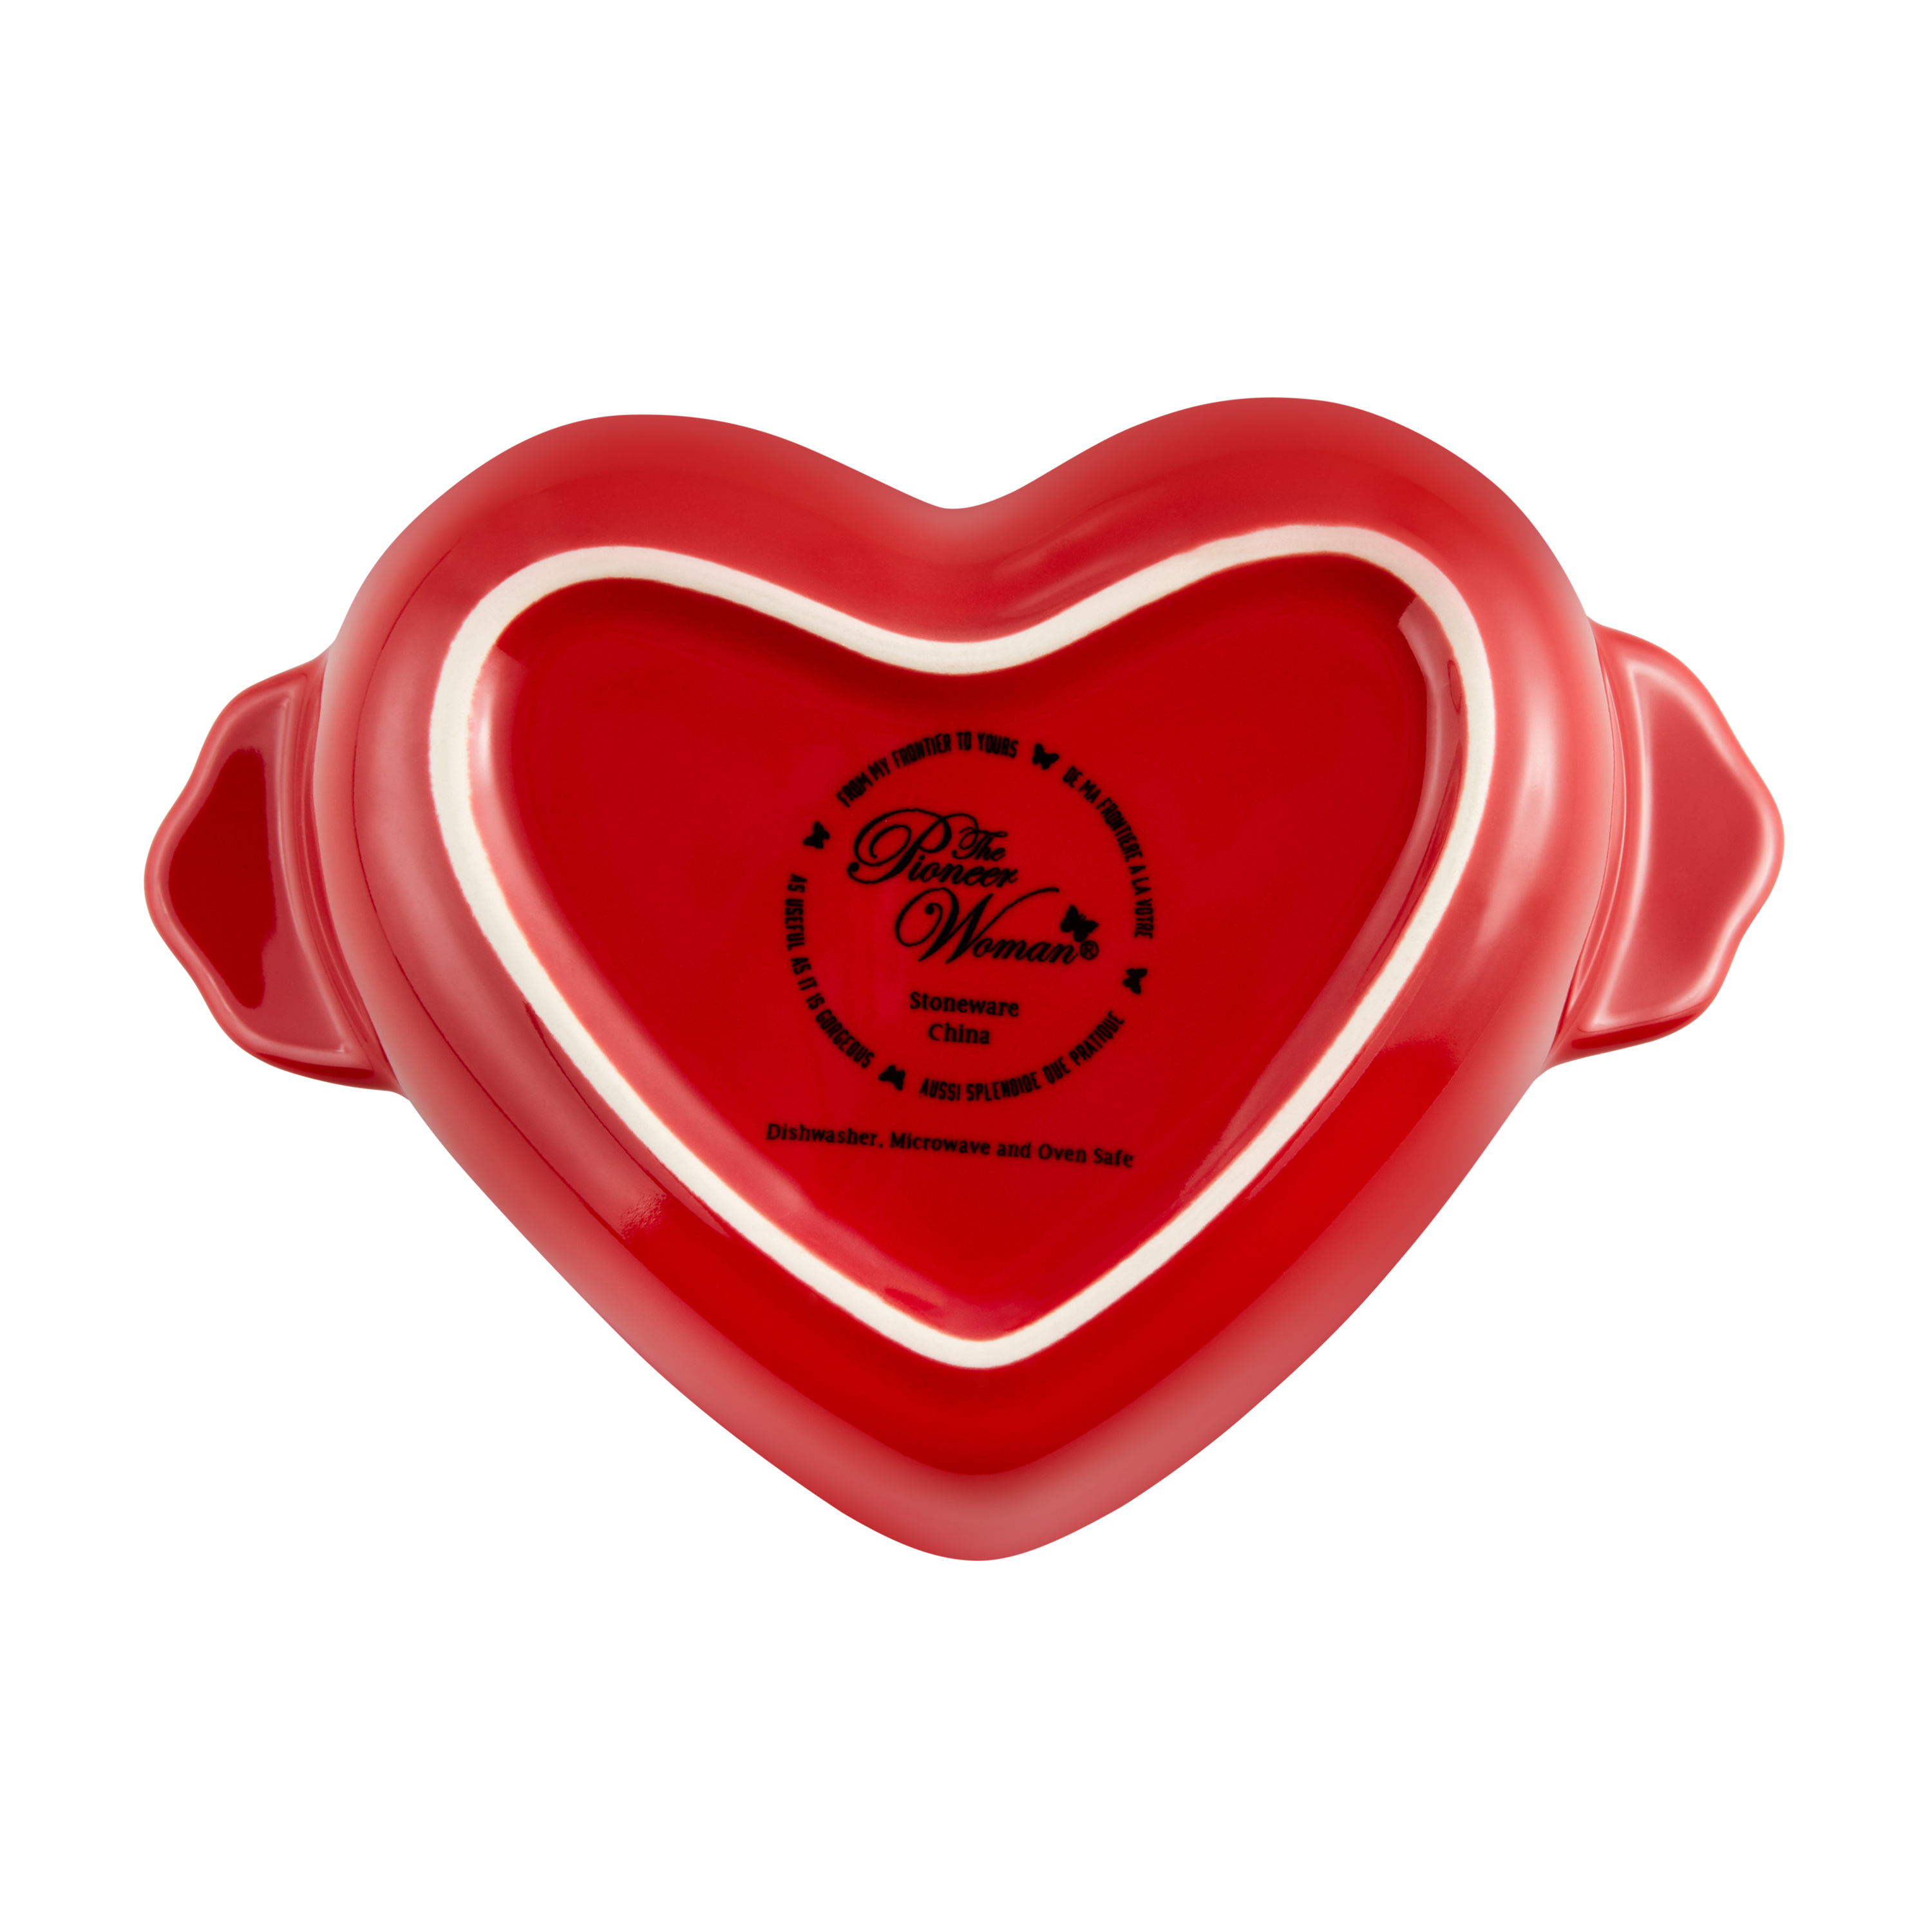 3 Red Mini Heart, Ceramic Baking Dish with Lid, The Pioneer Woman 6.45" - image 5 of 7